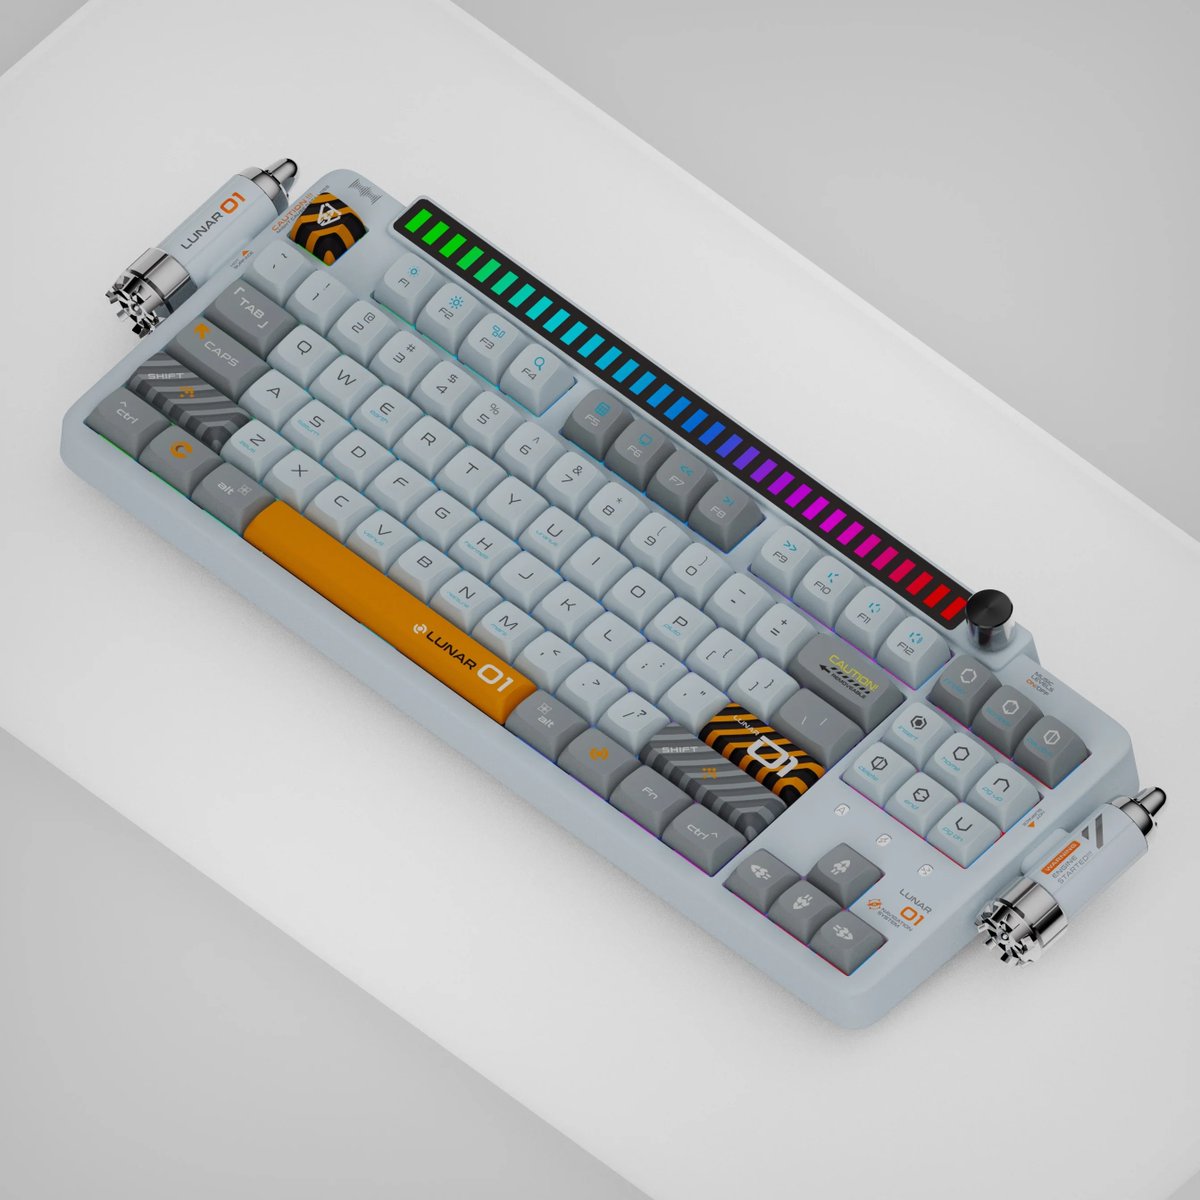 Lunar 01: Experience Elegance and Performance

Experience the perfect blend of style and functionality with the Keysme Lunar 01 Keyboard Bundle. Featuring a sleek design and customizable RGB lighting.

Buy Link: keysme.com/products/keysm…

#KeysMe #lunar01